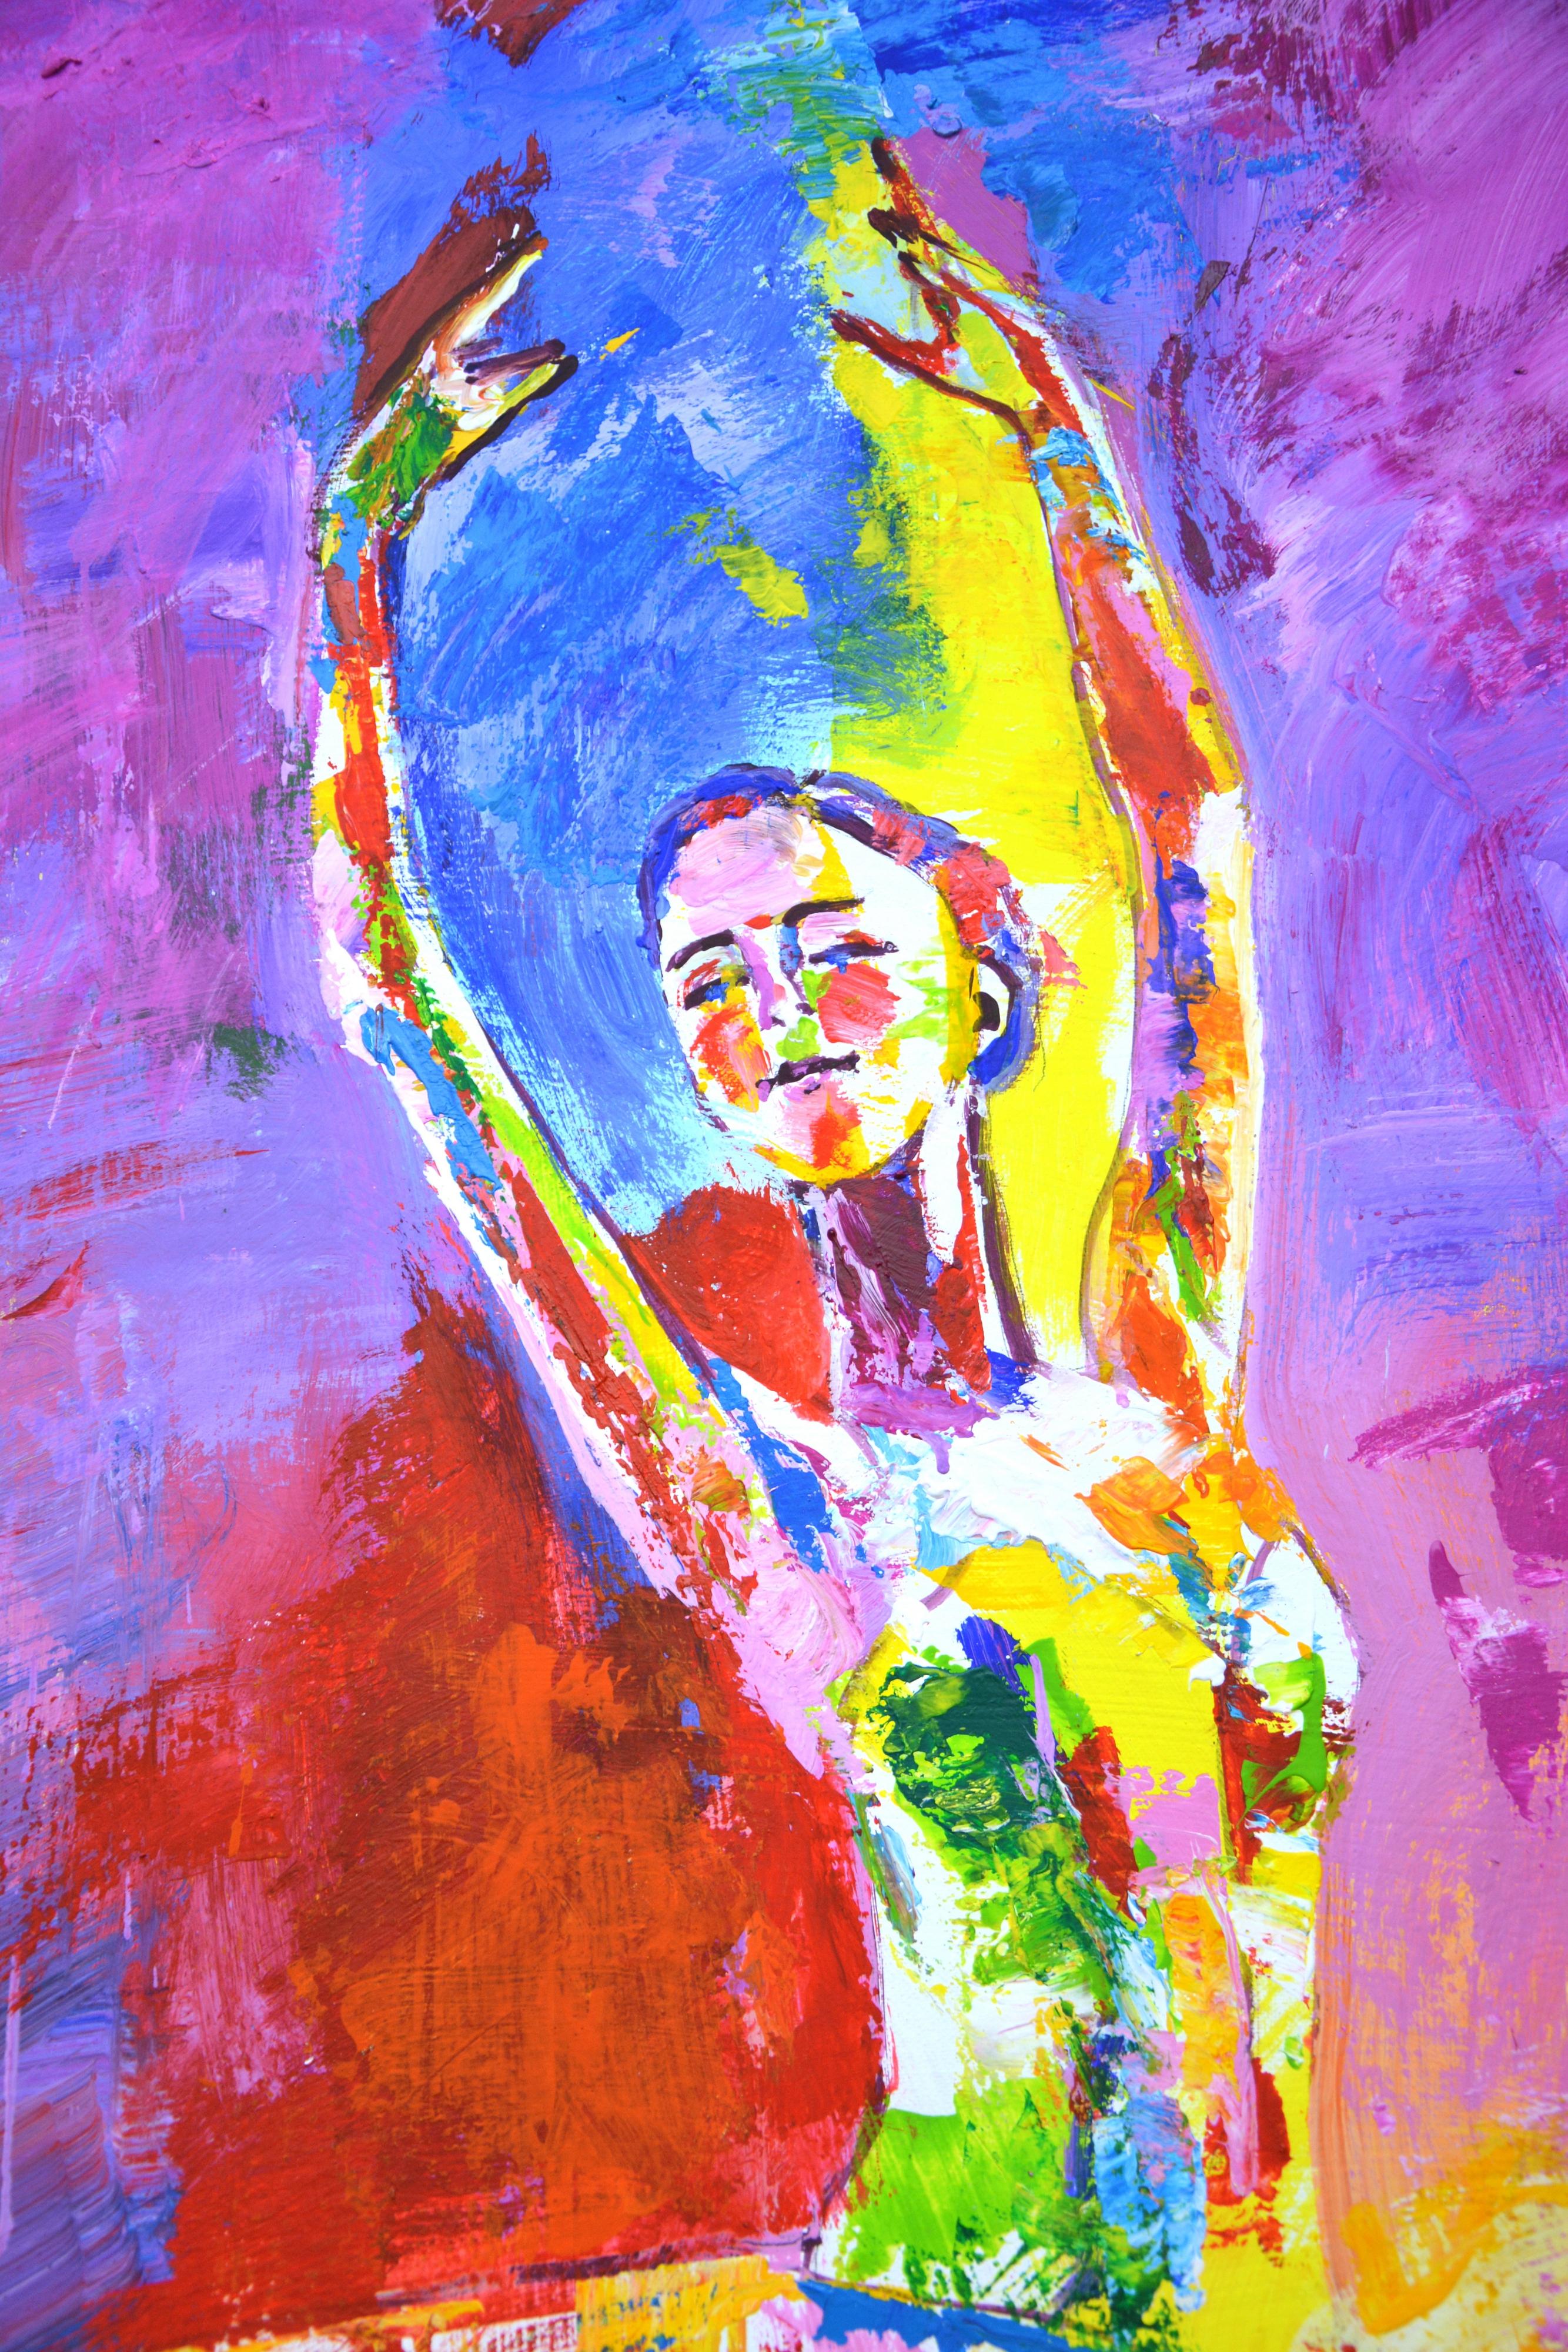 Ballerina. Ballet dancer, girl, figurative, movement, bright colored paints on an abstract bright background. Painted in expressionism style, acrylic on canvas. Covered with varnish. Artist's signature. The sides are painted in the color of the